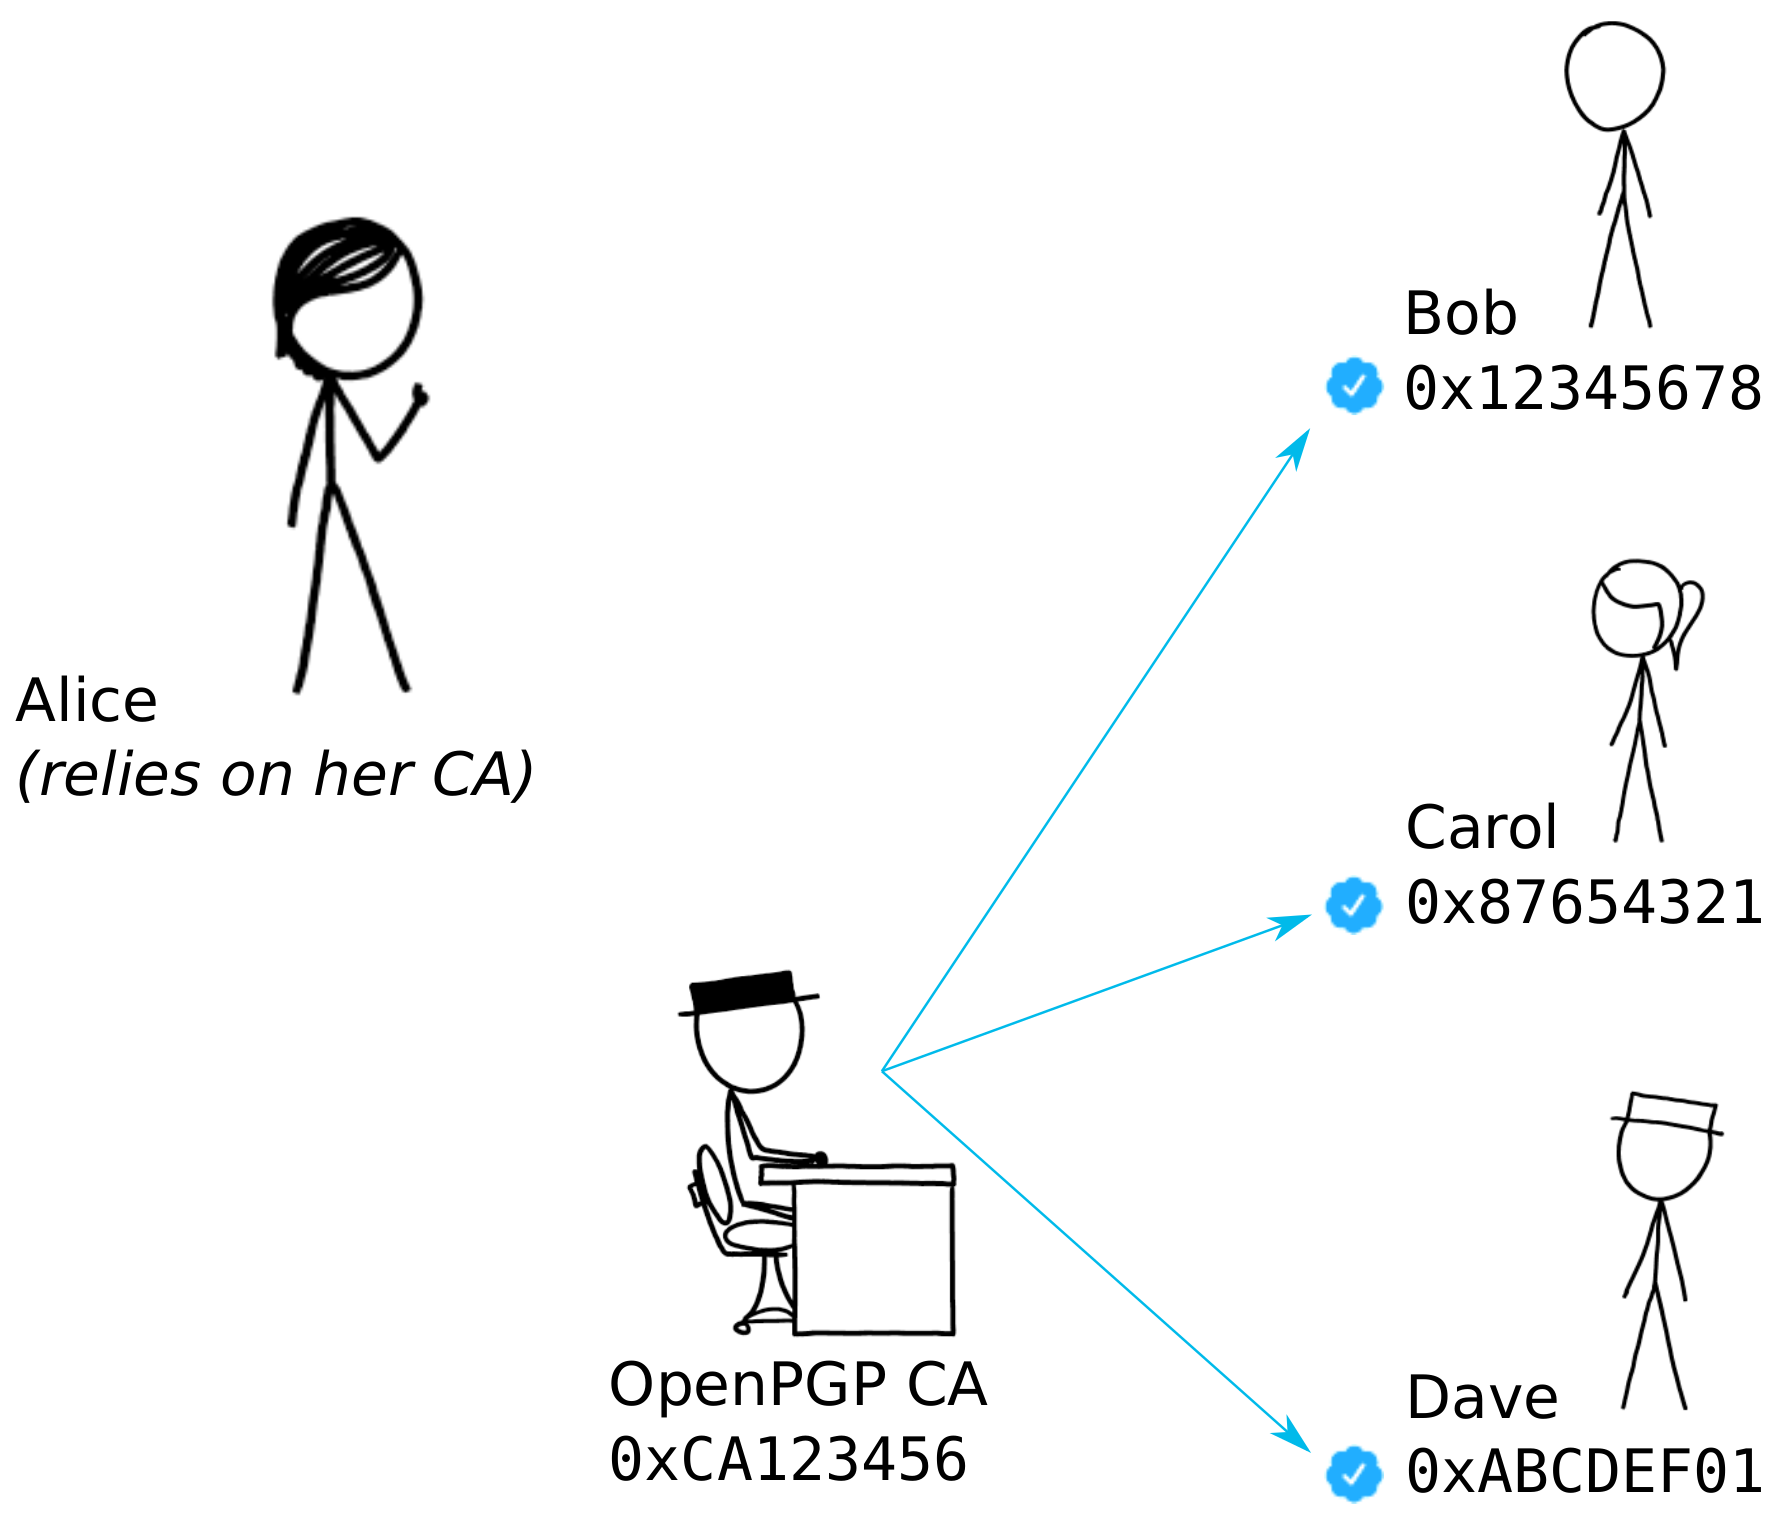 A diagram showing a user Alice, who is relying on her OpenPGP CA admin to have three other users, authenticated Bob, Carol and Dave.